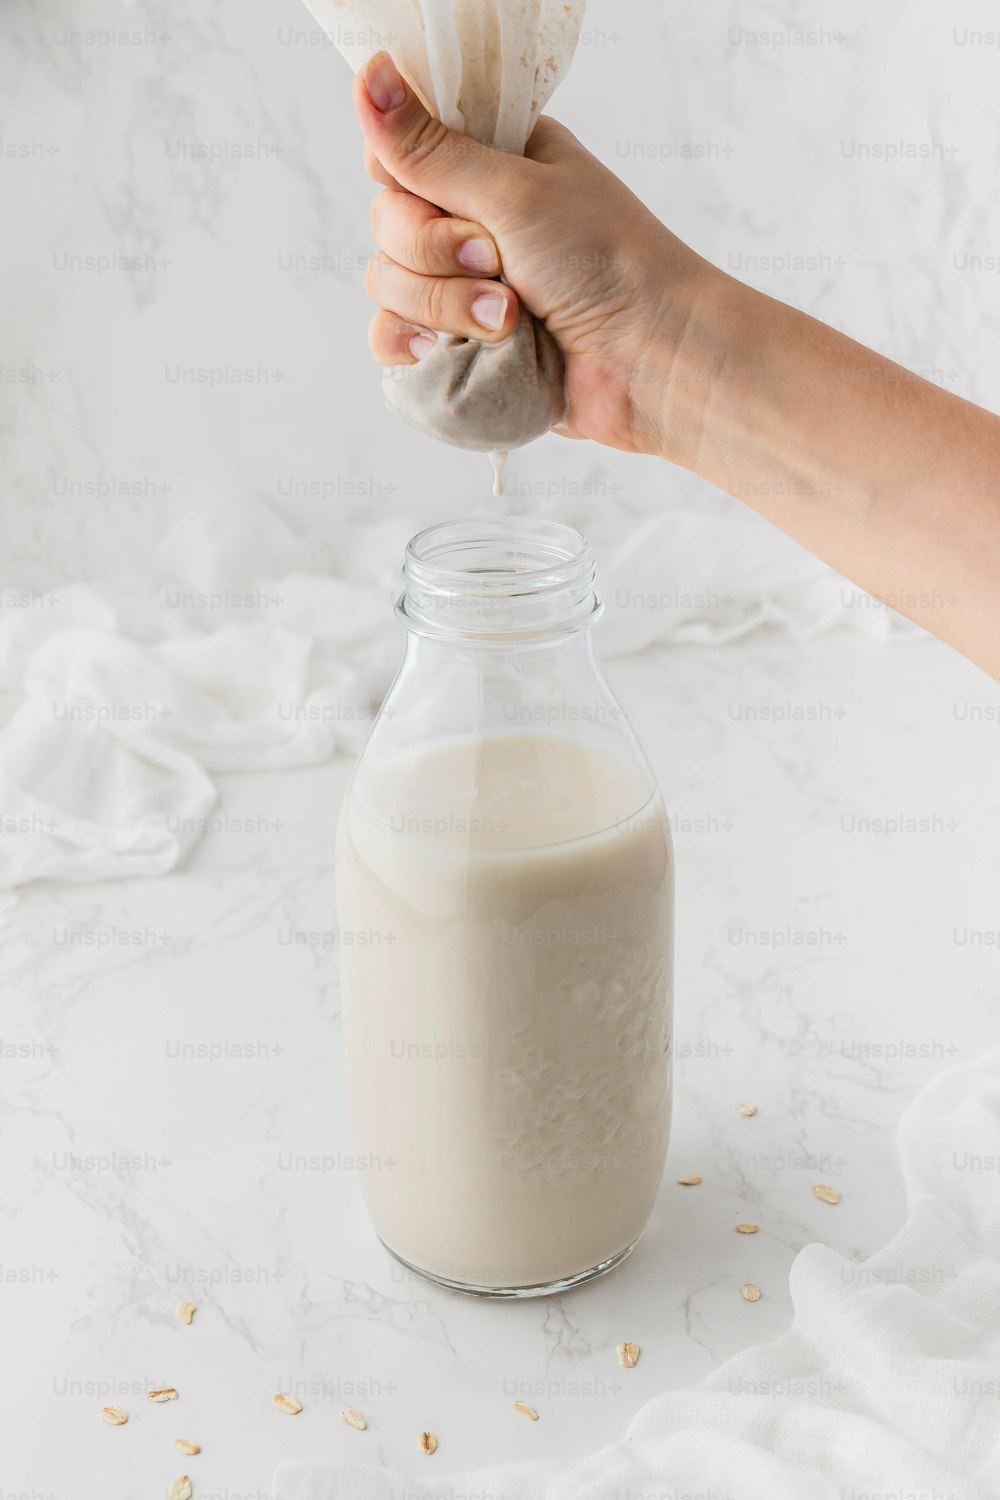 a person is pouring a glass of milk into a jar